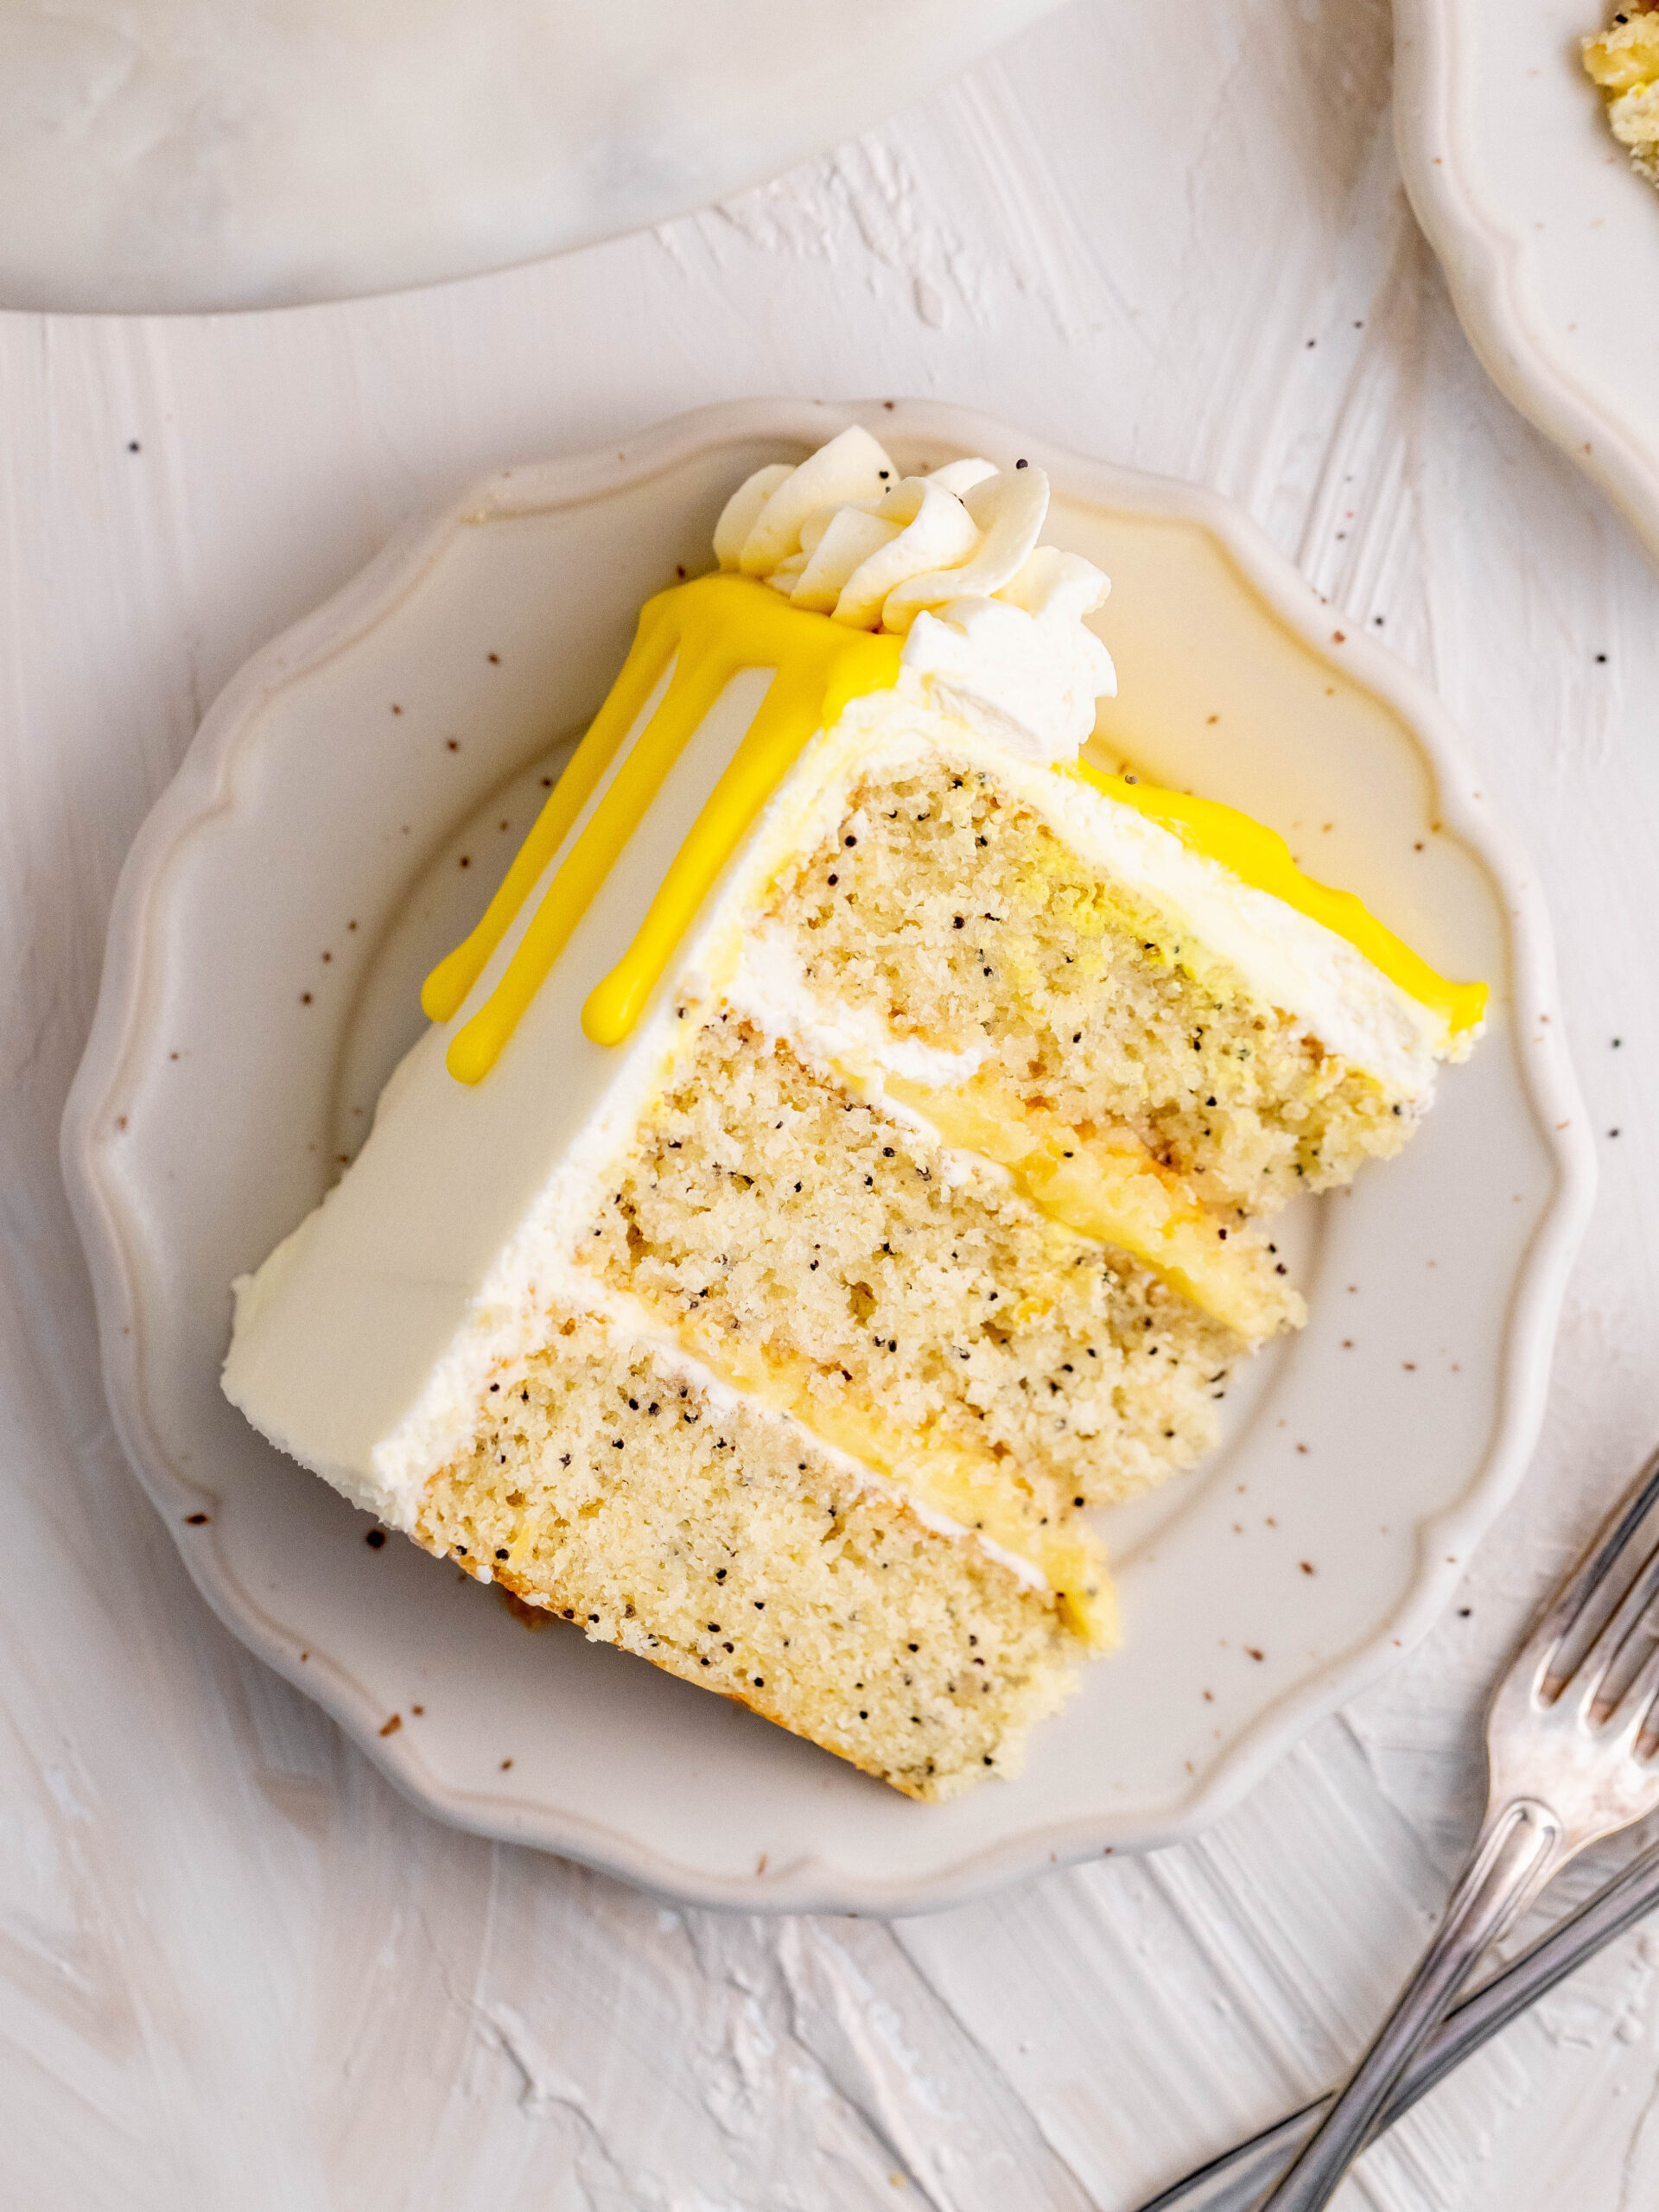 A slice of lemon poppy seed layer cake on a plate.